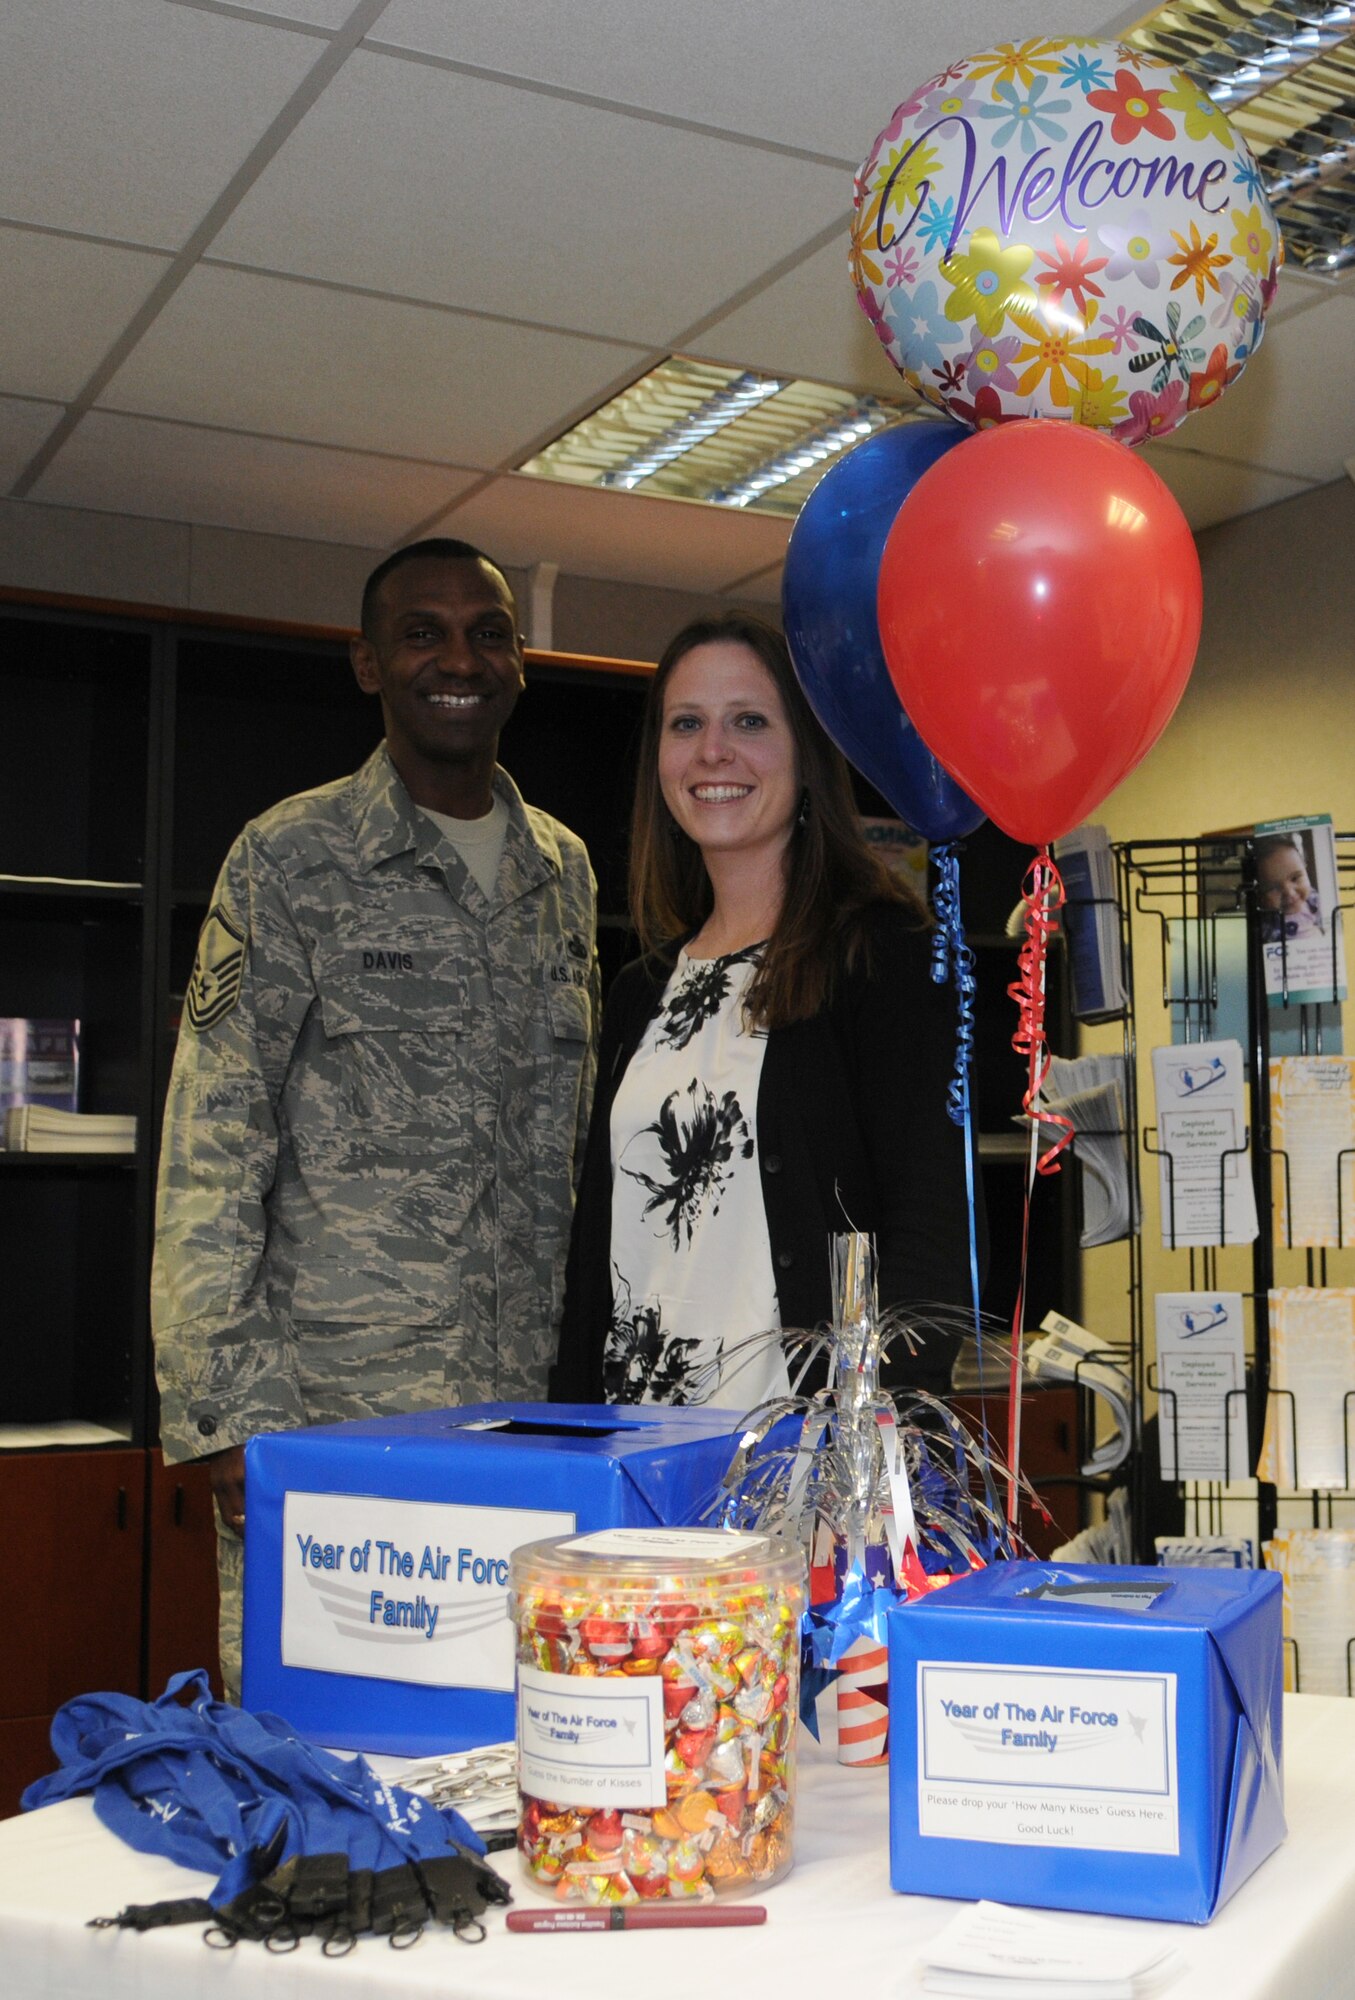 U.S. Air Force Master Sgt. Willis Davis and Ms. Kathleen Moree, 86th Mission Support Squadron community readiness, pose for a photo by the drawing table which will be used to draw give-away prizes during the open house for the Air Force Family Week, Ramstein Air Base, Germany, Nov. 4, 2009. Nov. 1st thru the 7th is designated by Secretary of the Air Force as "Air Force Family Week". (U.S. Air Force photo by Airman 1st Class Caleb Pierce)